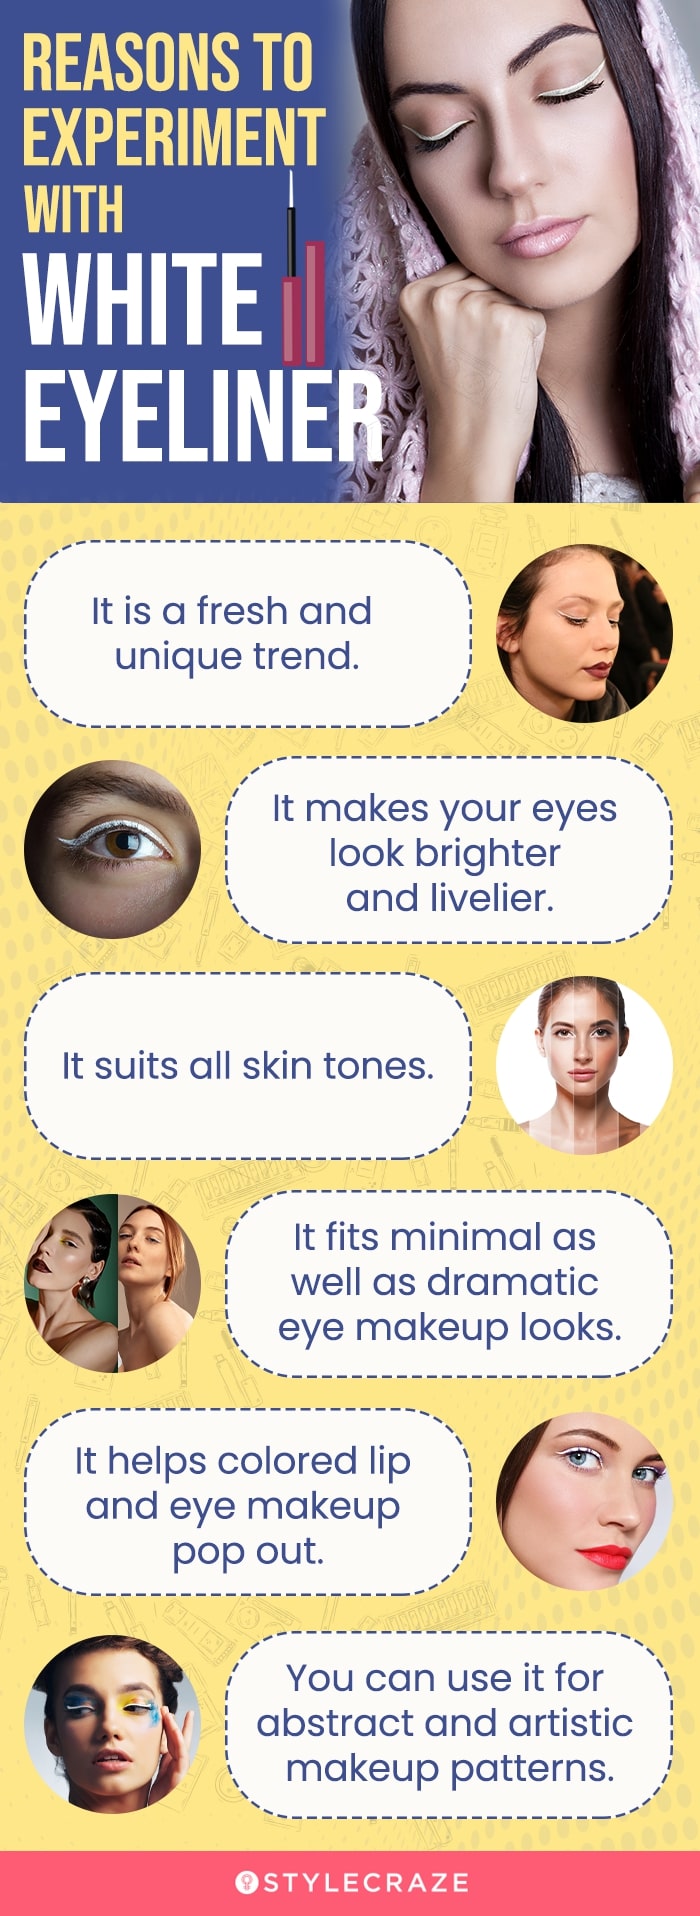 reasons to experiment with white eyeliner (infographic)